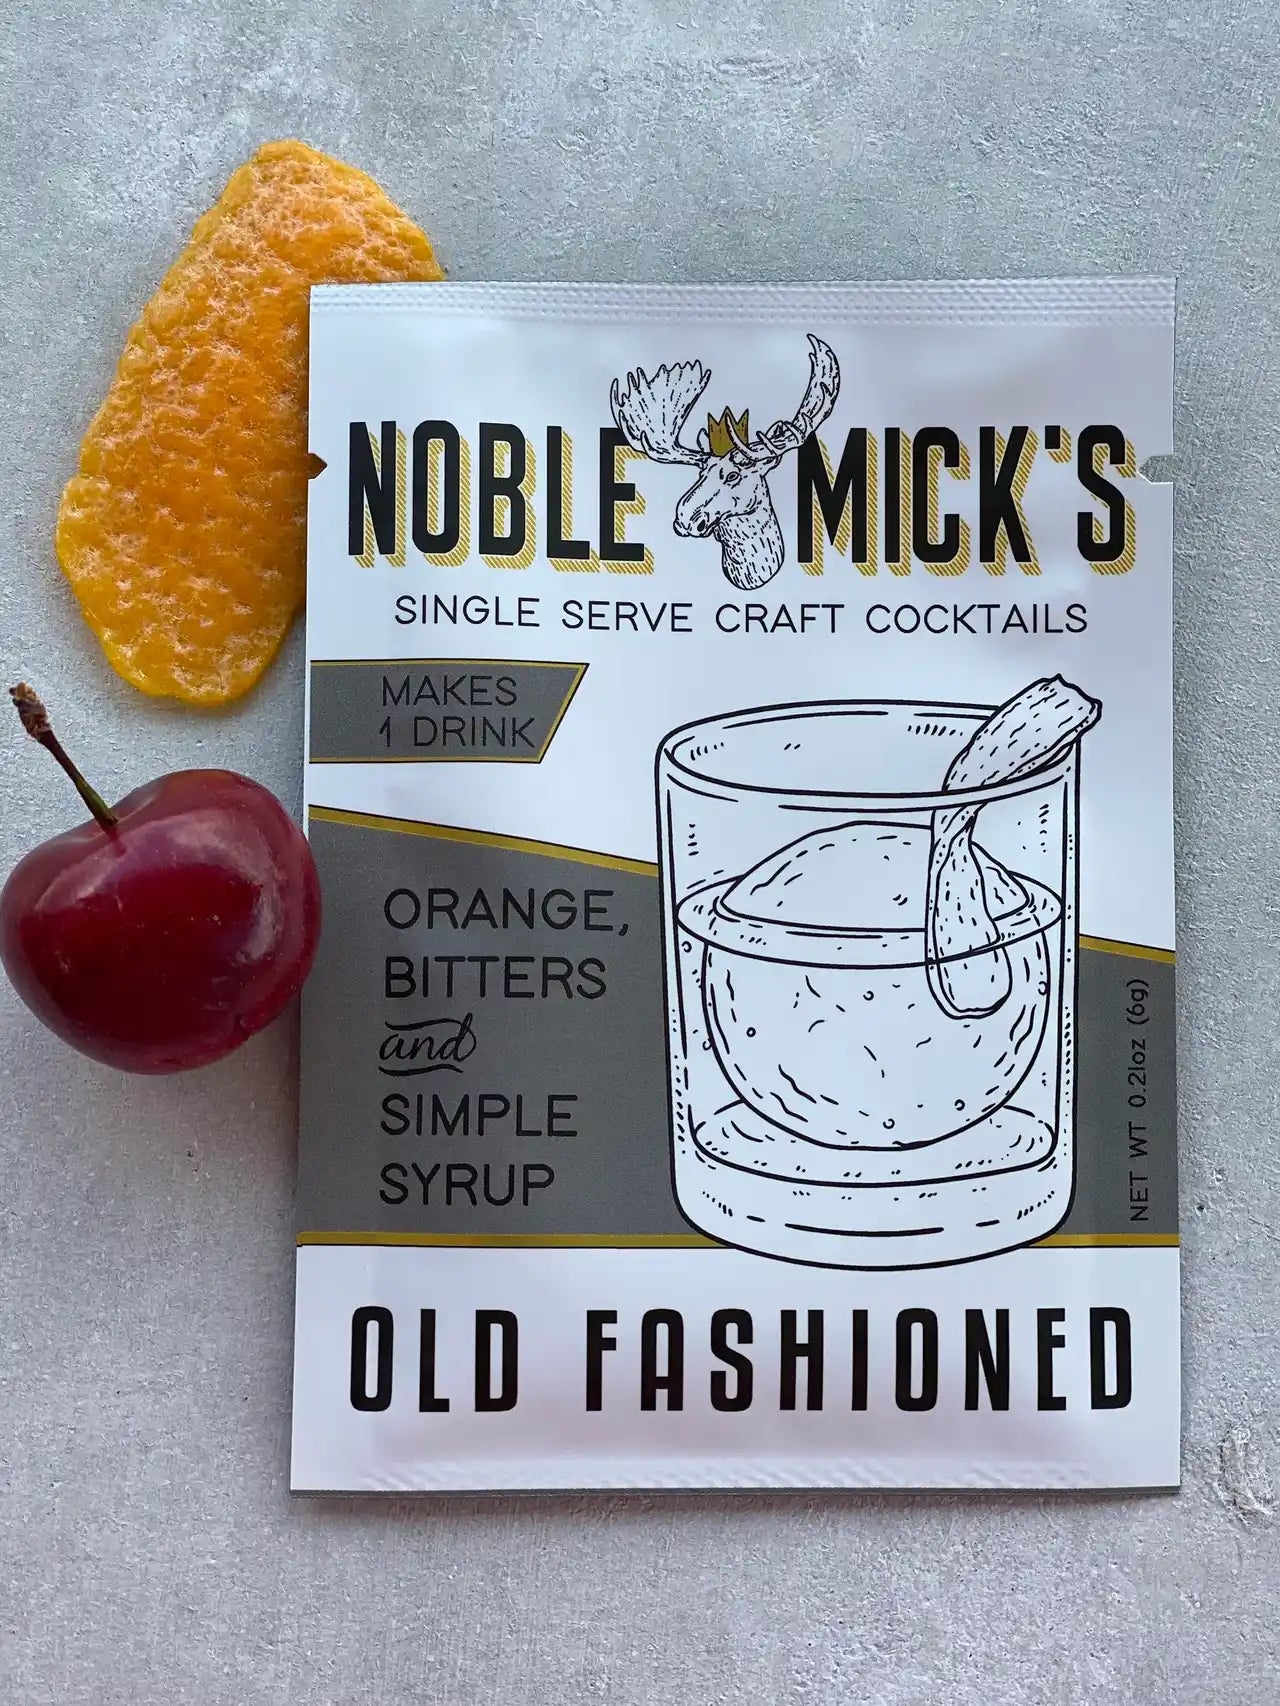 noble mick's single serve packet of Old Fashioned mix on a bar top with a cherry and an orange peel.